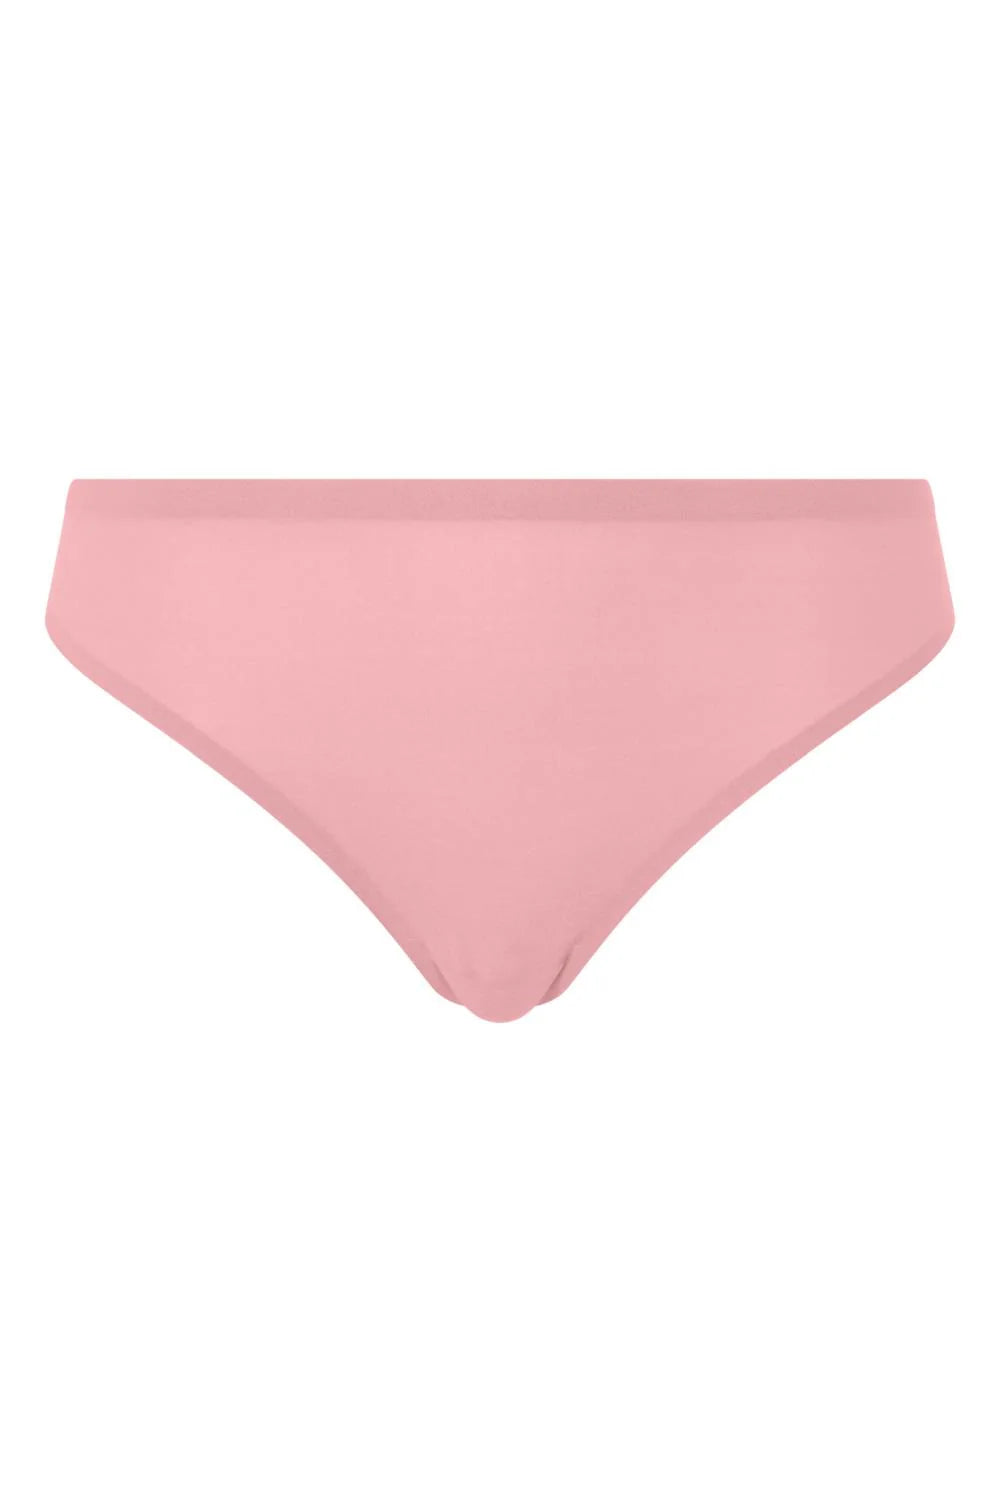 Chantelle Soft Stretch Thong - Tomboy Pink Lingerie - Panties - Soft Stretch by Chantelle | Grace the Boutique